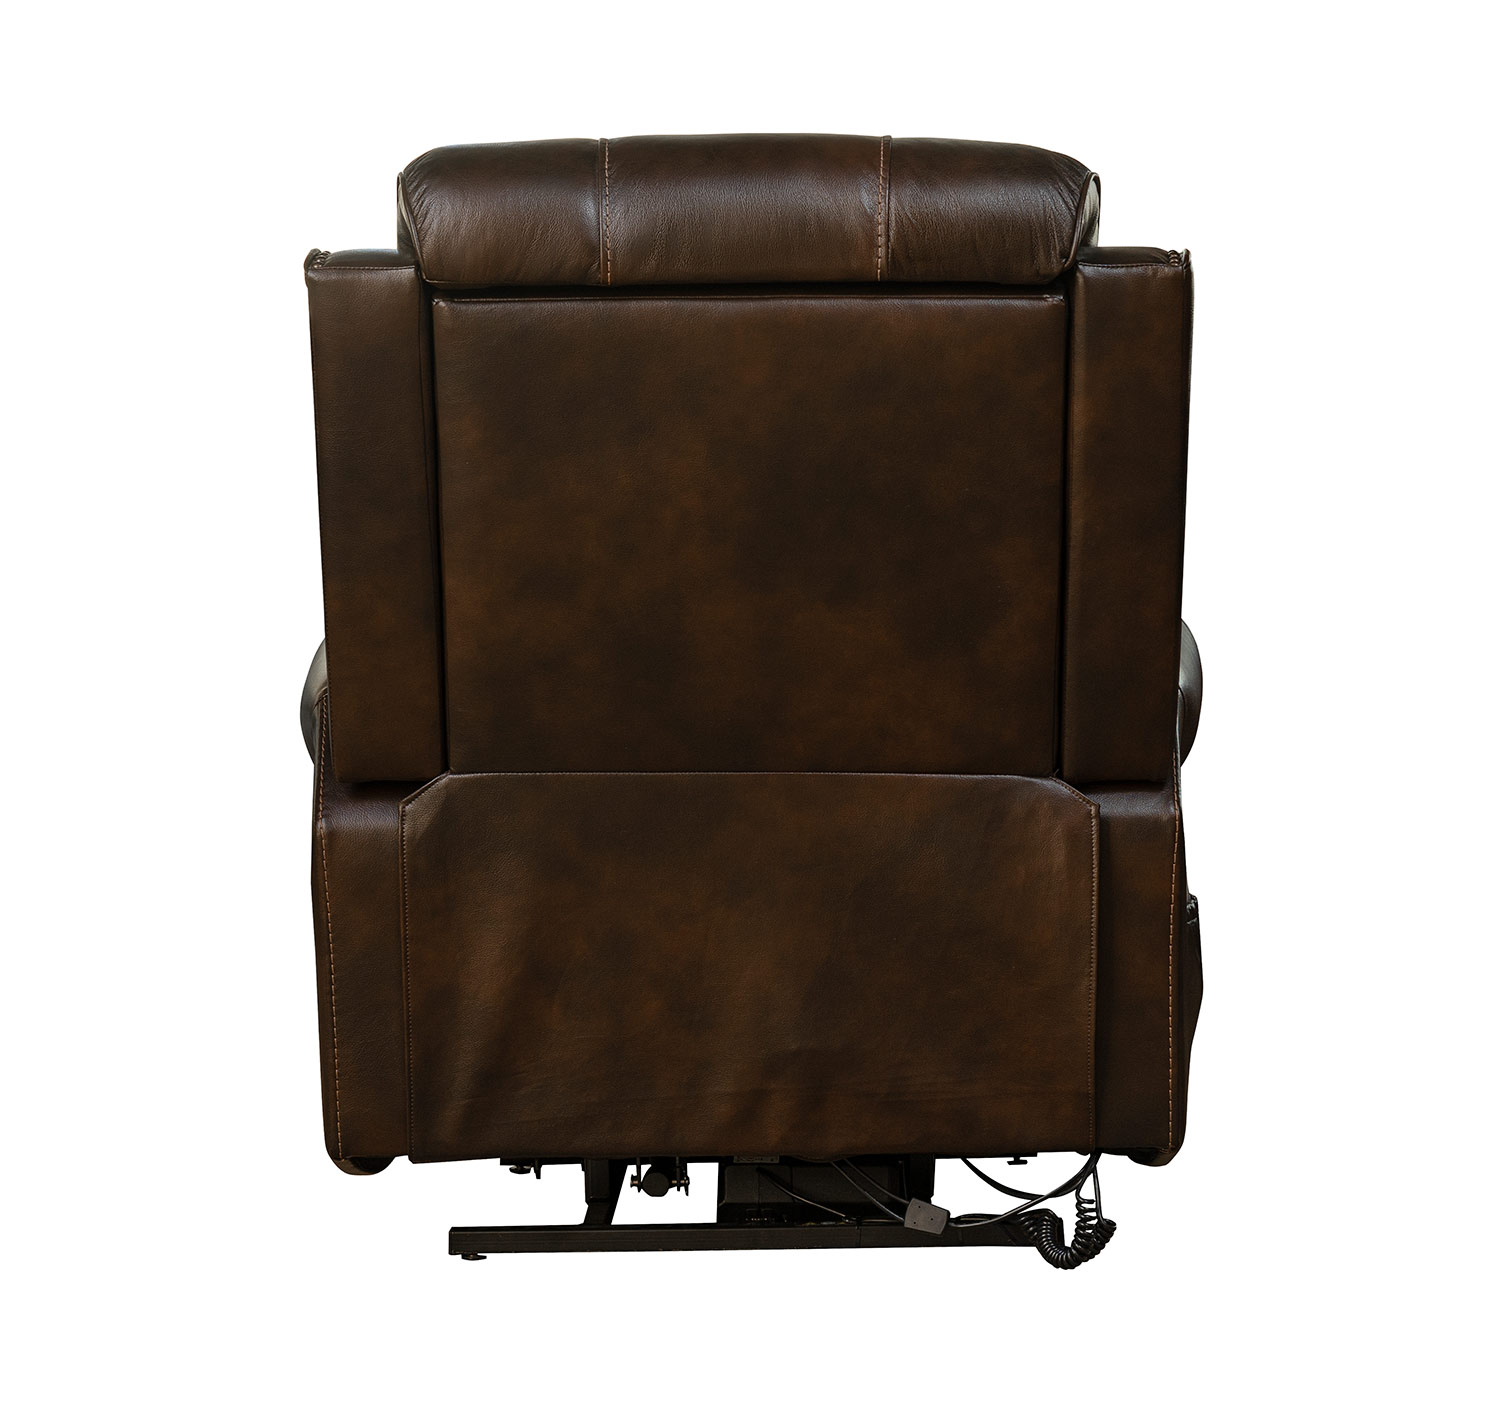 Barcalounger Langston Lift Chair Recliner with Power Head Rest and Lumbar - Tonya Brown/Leather Match